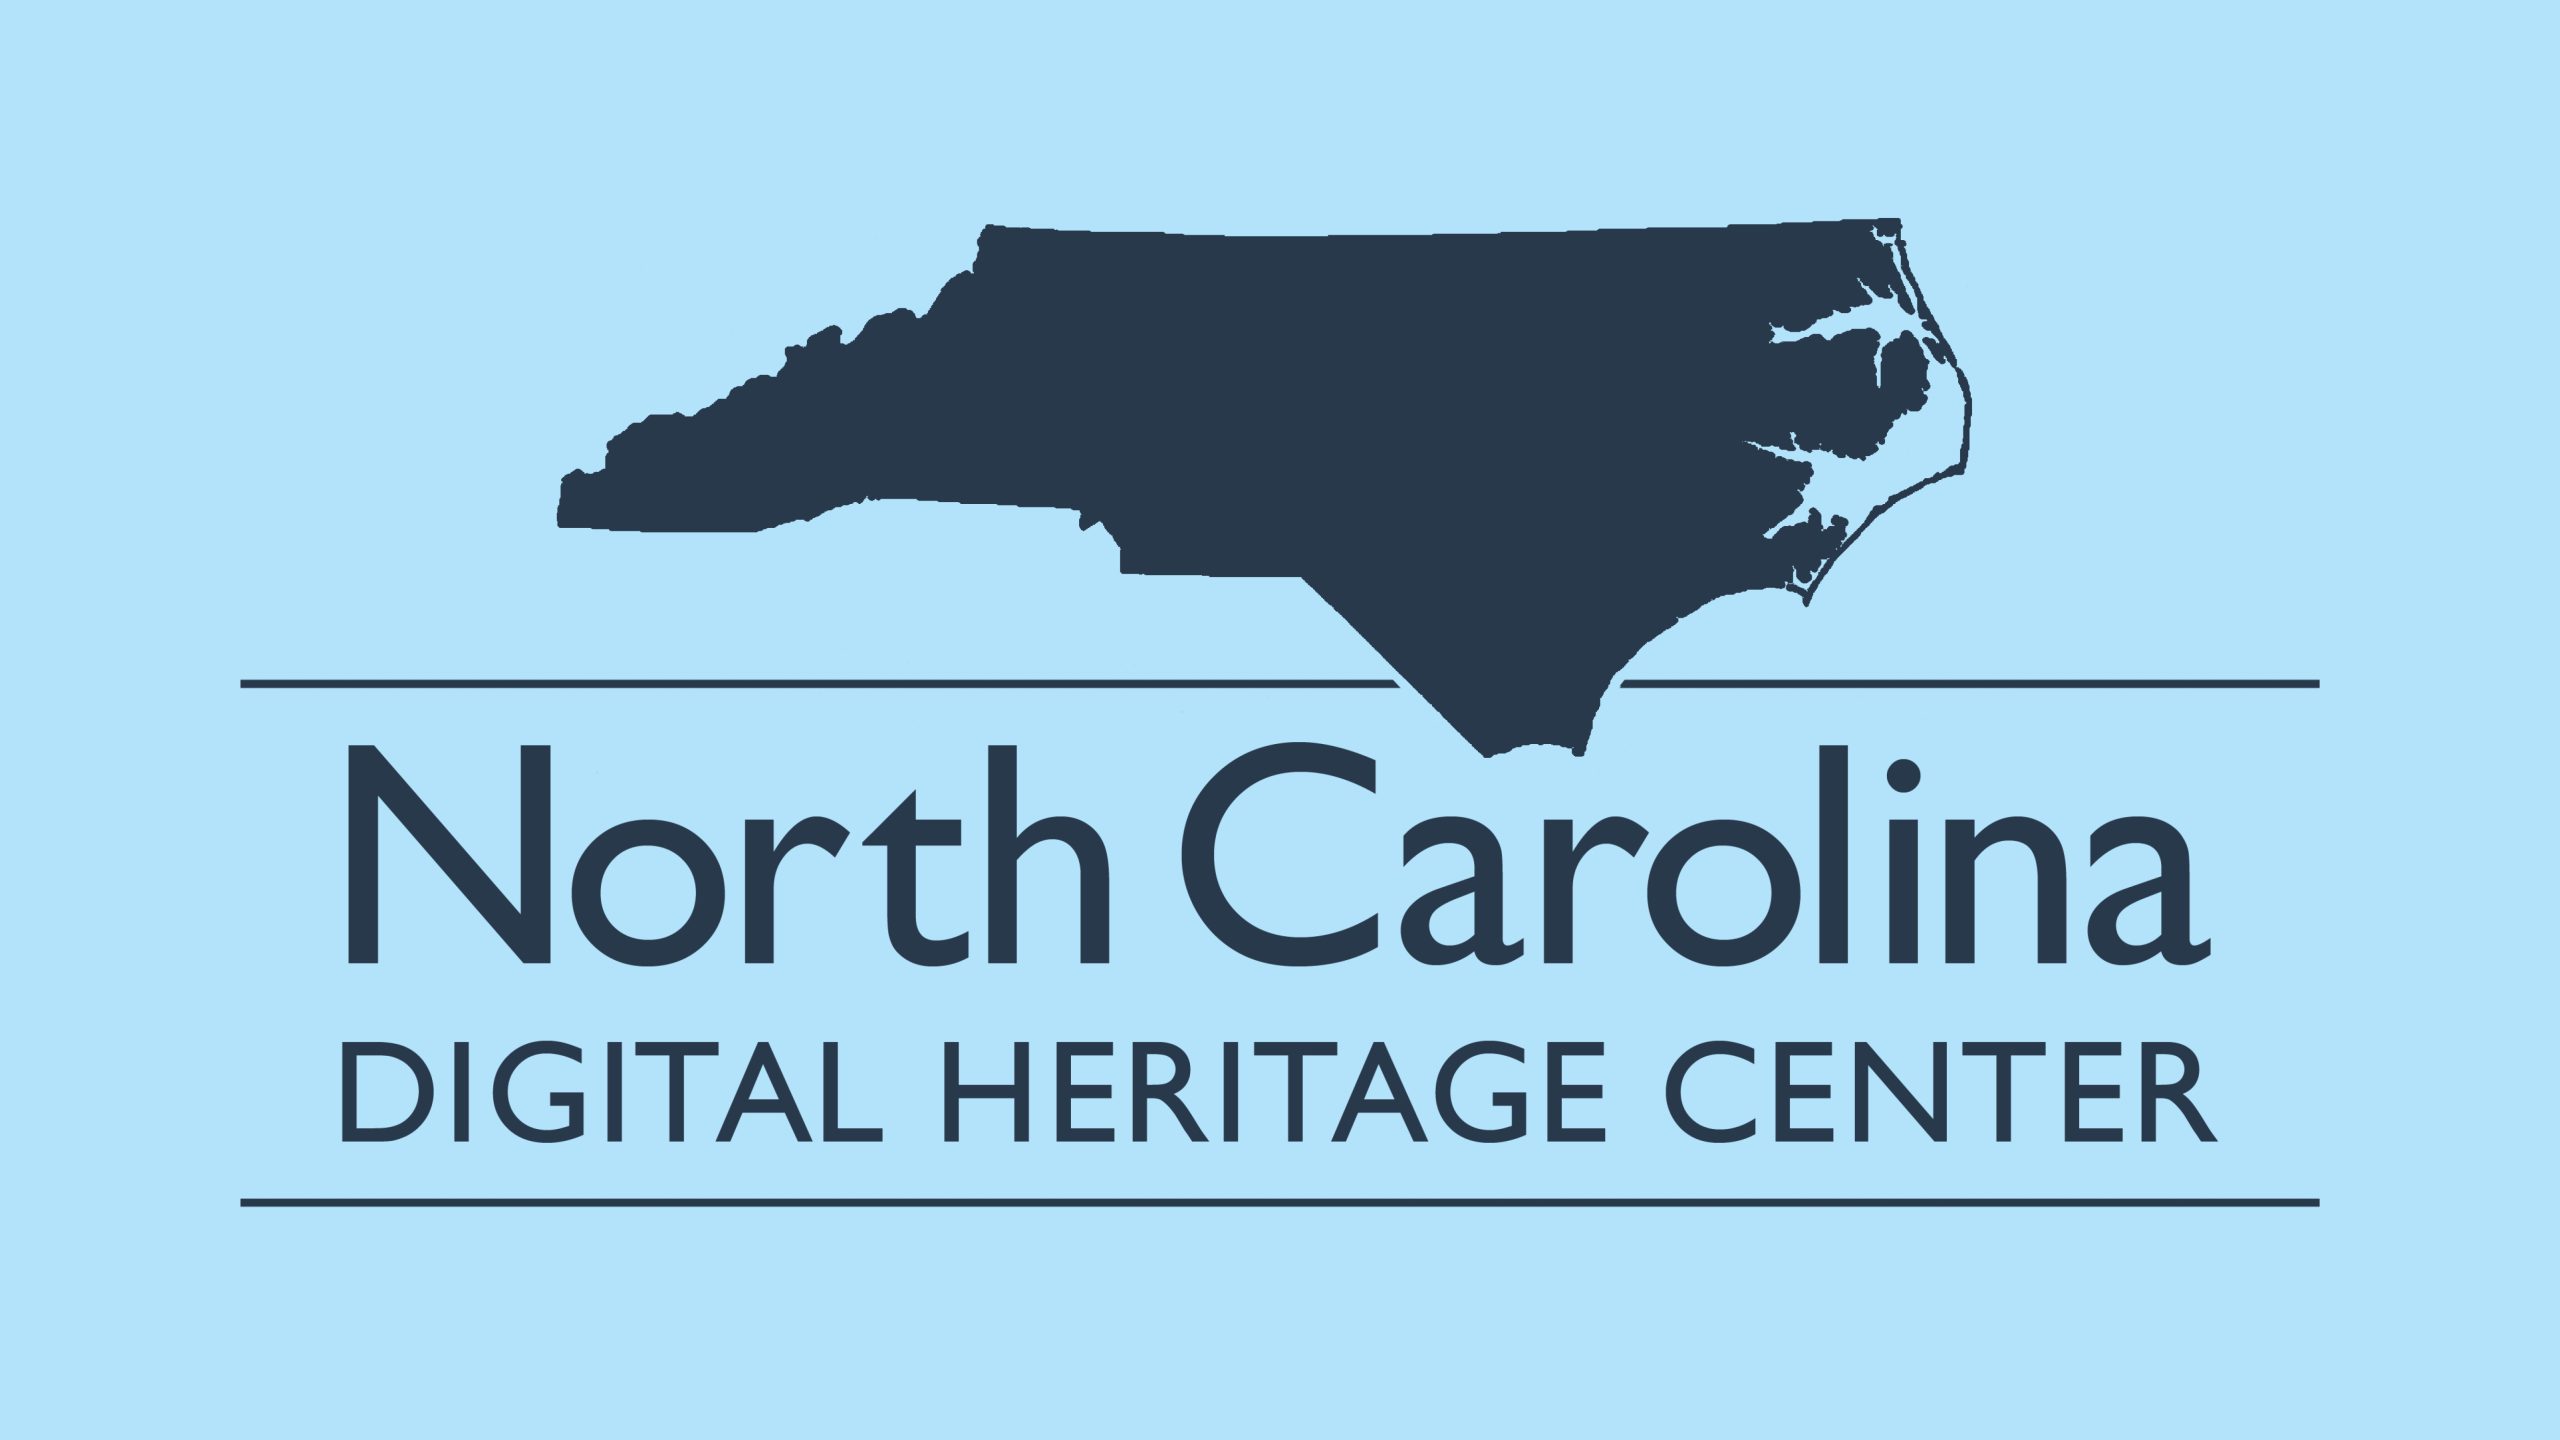 North Carolina Digital Heritage Center extends operations with $600,000 grant